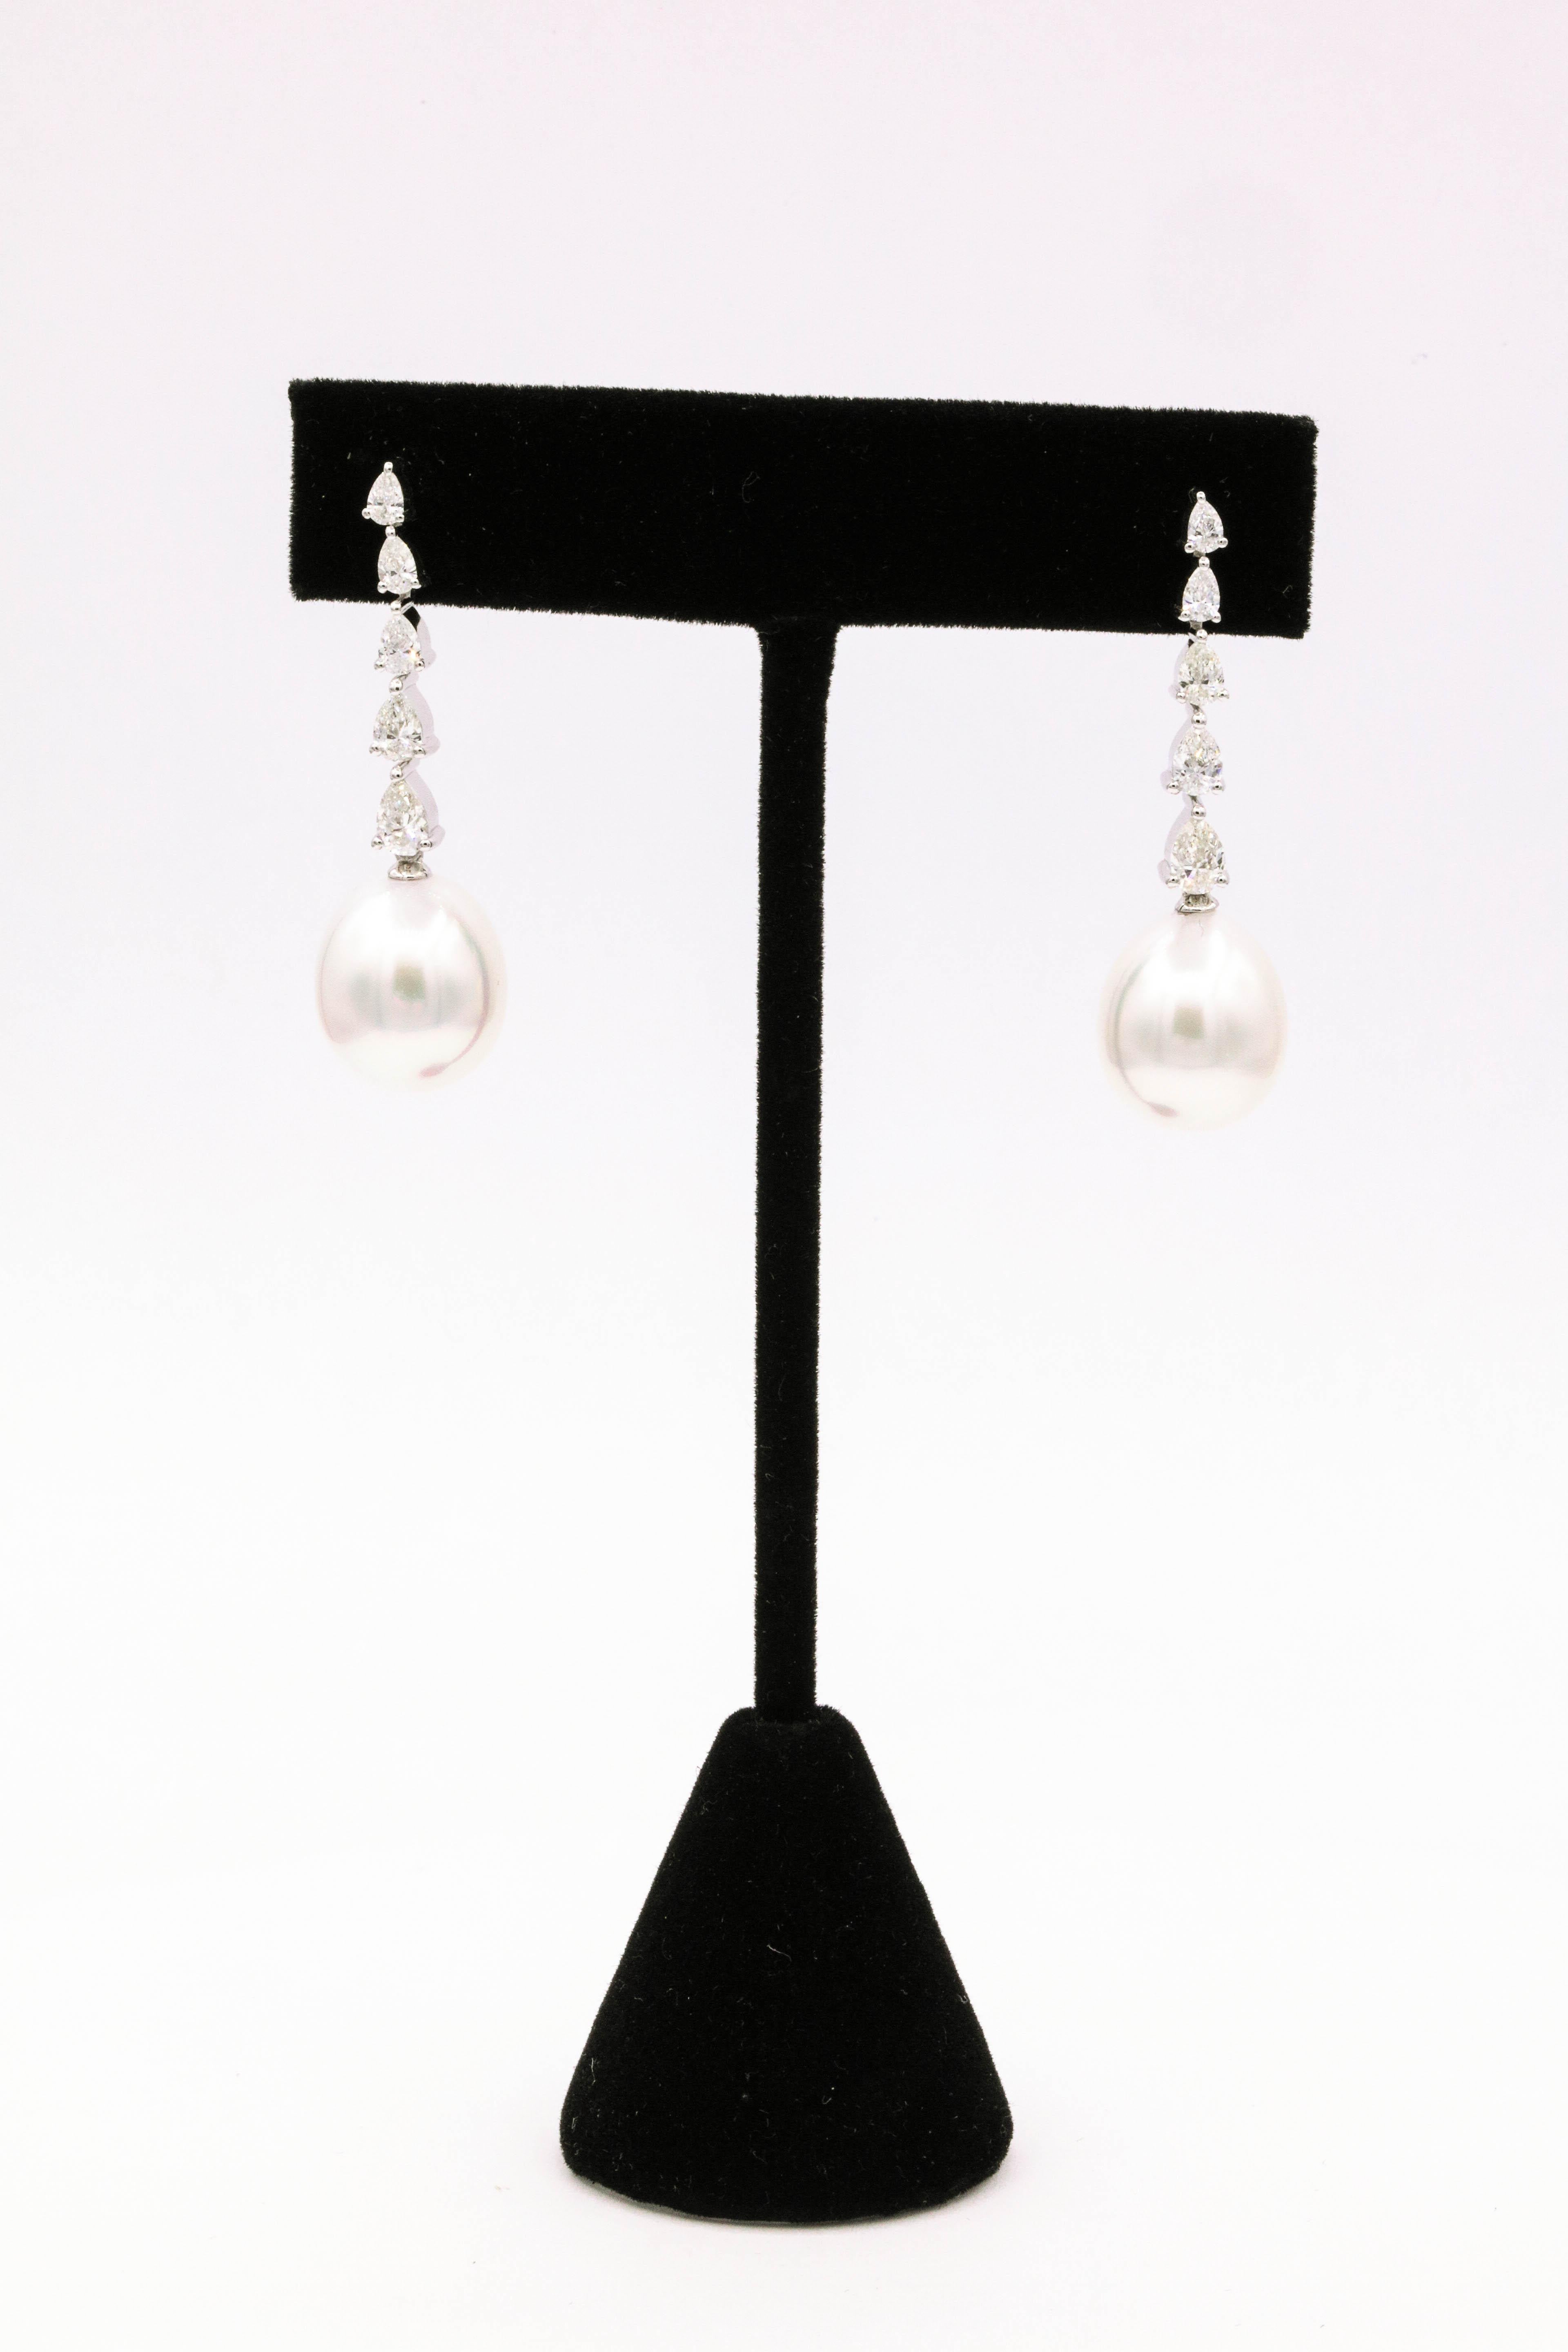 South Sea pearl drop earrings featuring 10 pear shape diamonds weighing 1.40 carats, in 18k white gold. 
South Sea Pearls: 12-13 mm
Color: G-H
Clarity: SI